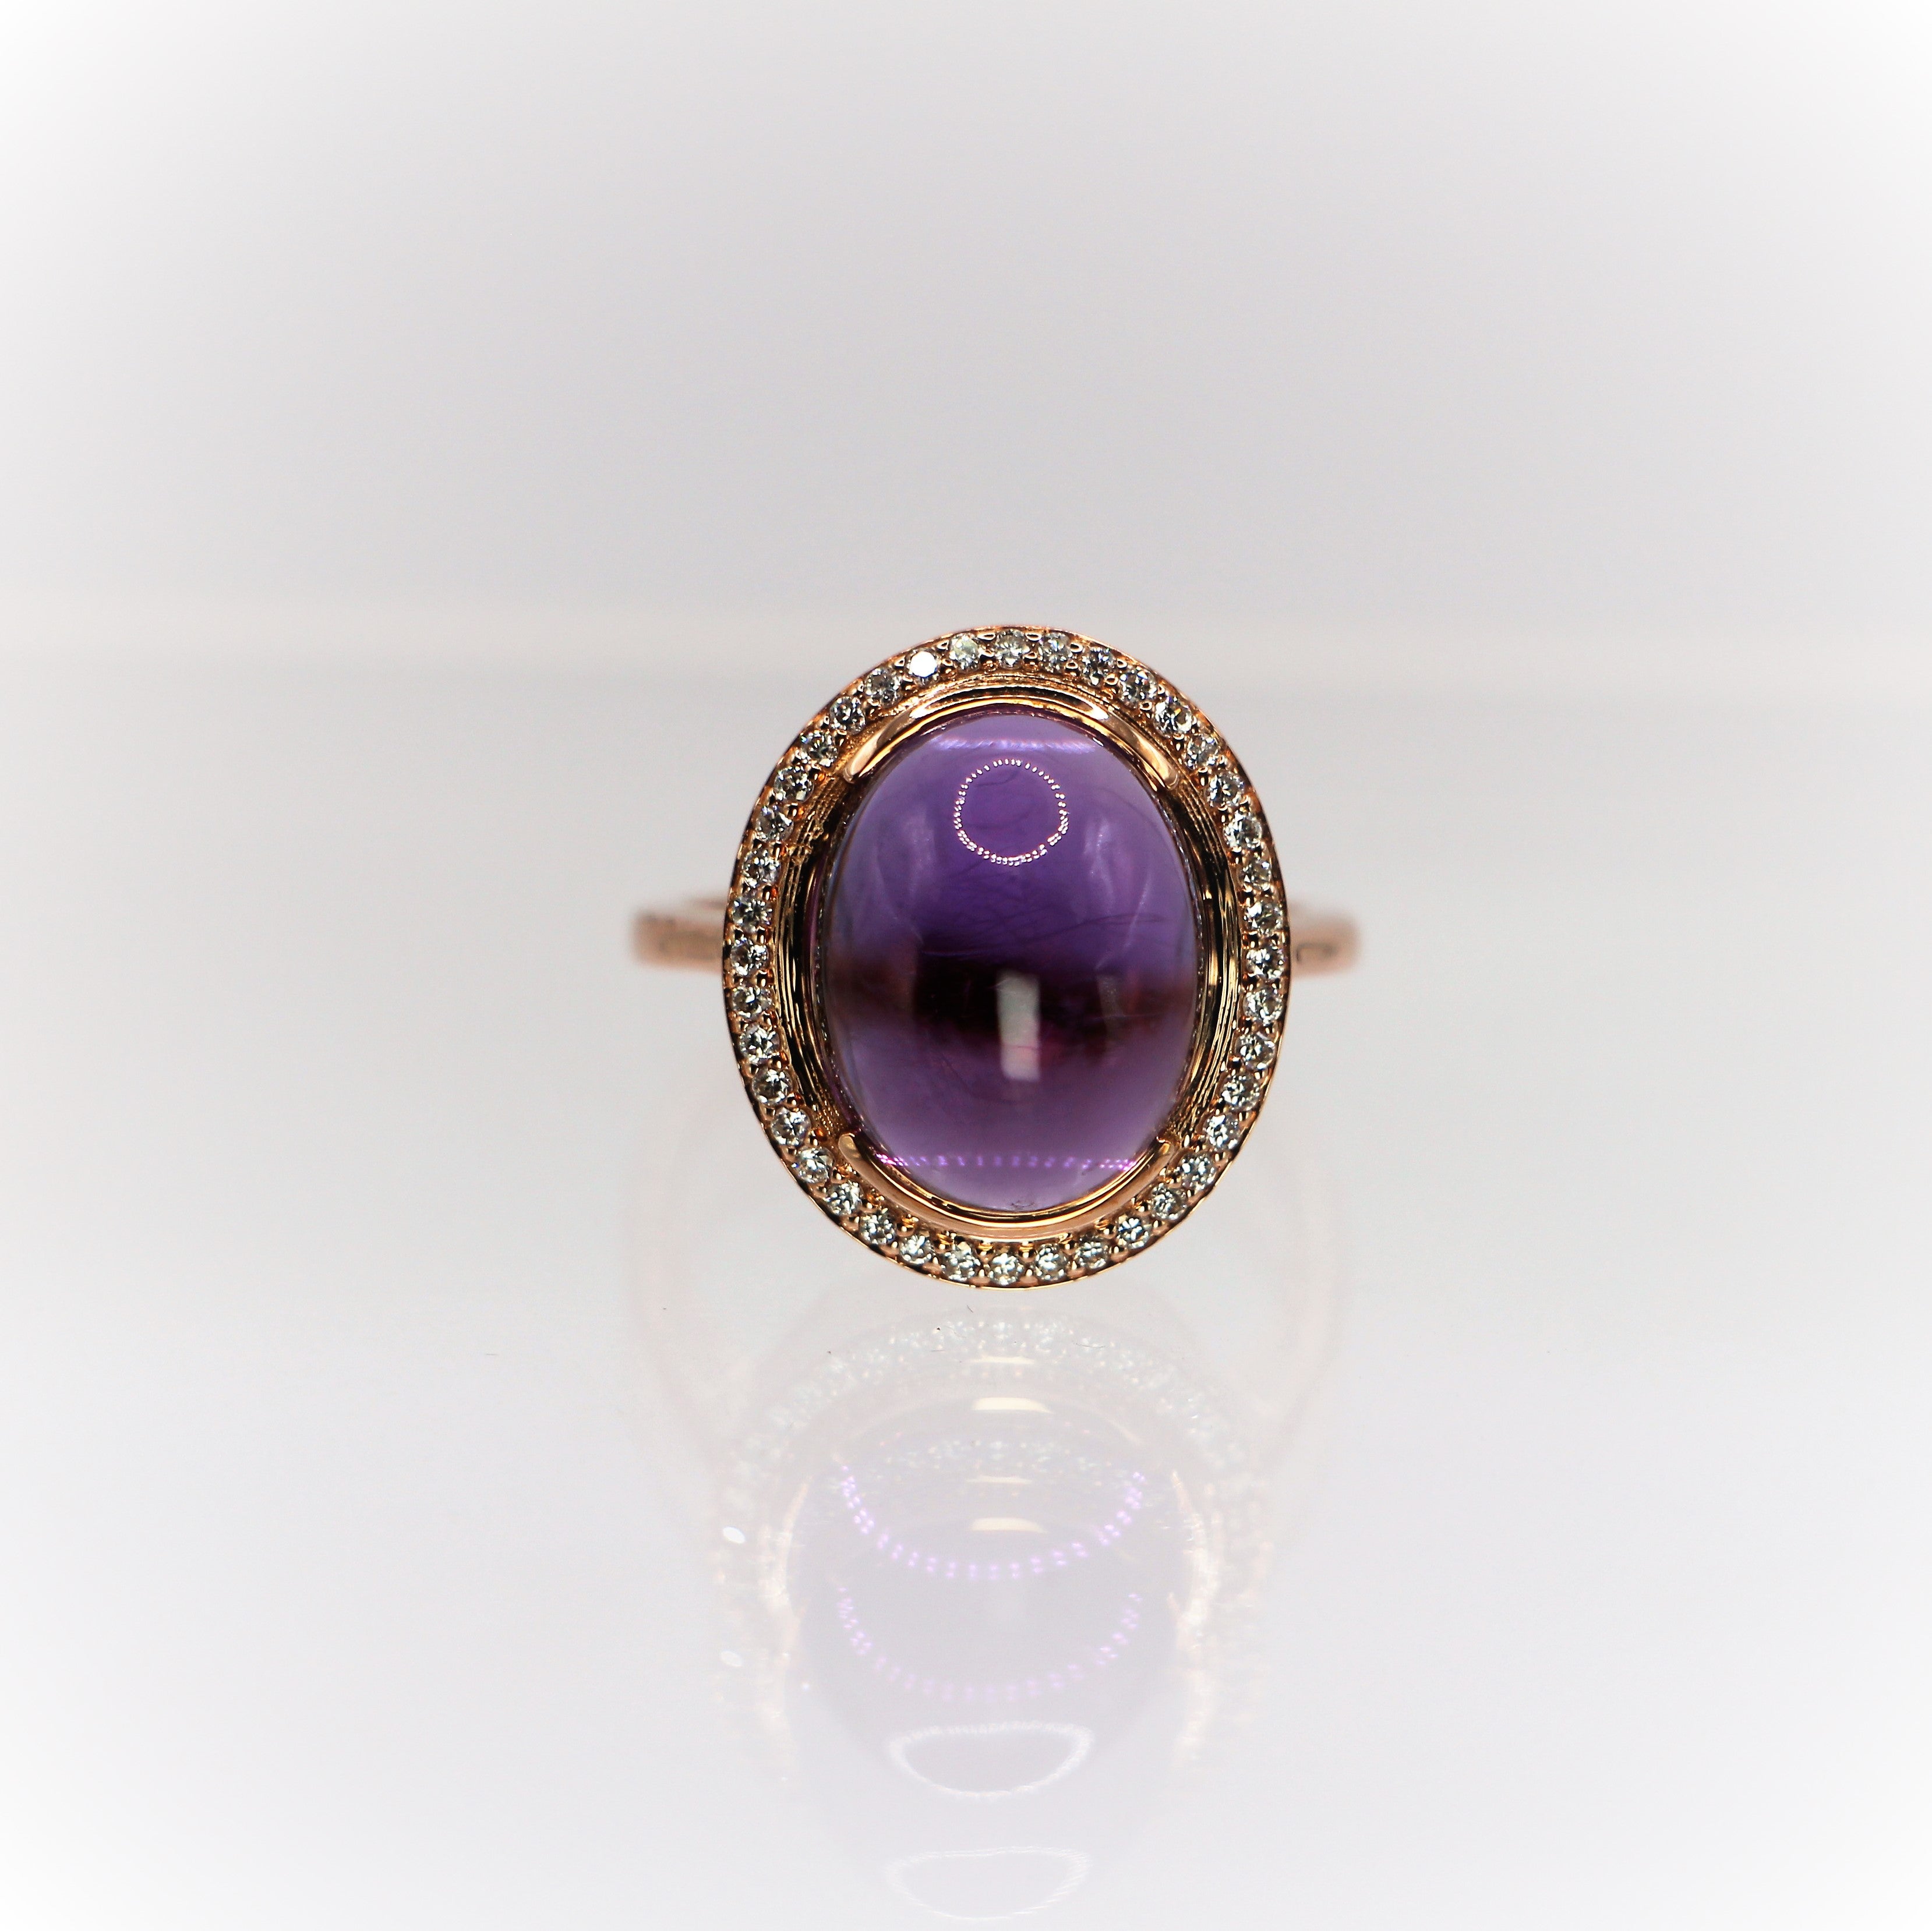 Amethyst Purple Oval Cabochon Cut Ring with pave Diamonds in 18 Carat Rose Gold 
The central stone is an Amethyst 8.53ct surrounded by brilliant cut pave diamonds 0.28ct
A delicate and stylish piece of jewelry,  a statement ring in vintage style